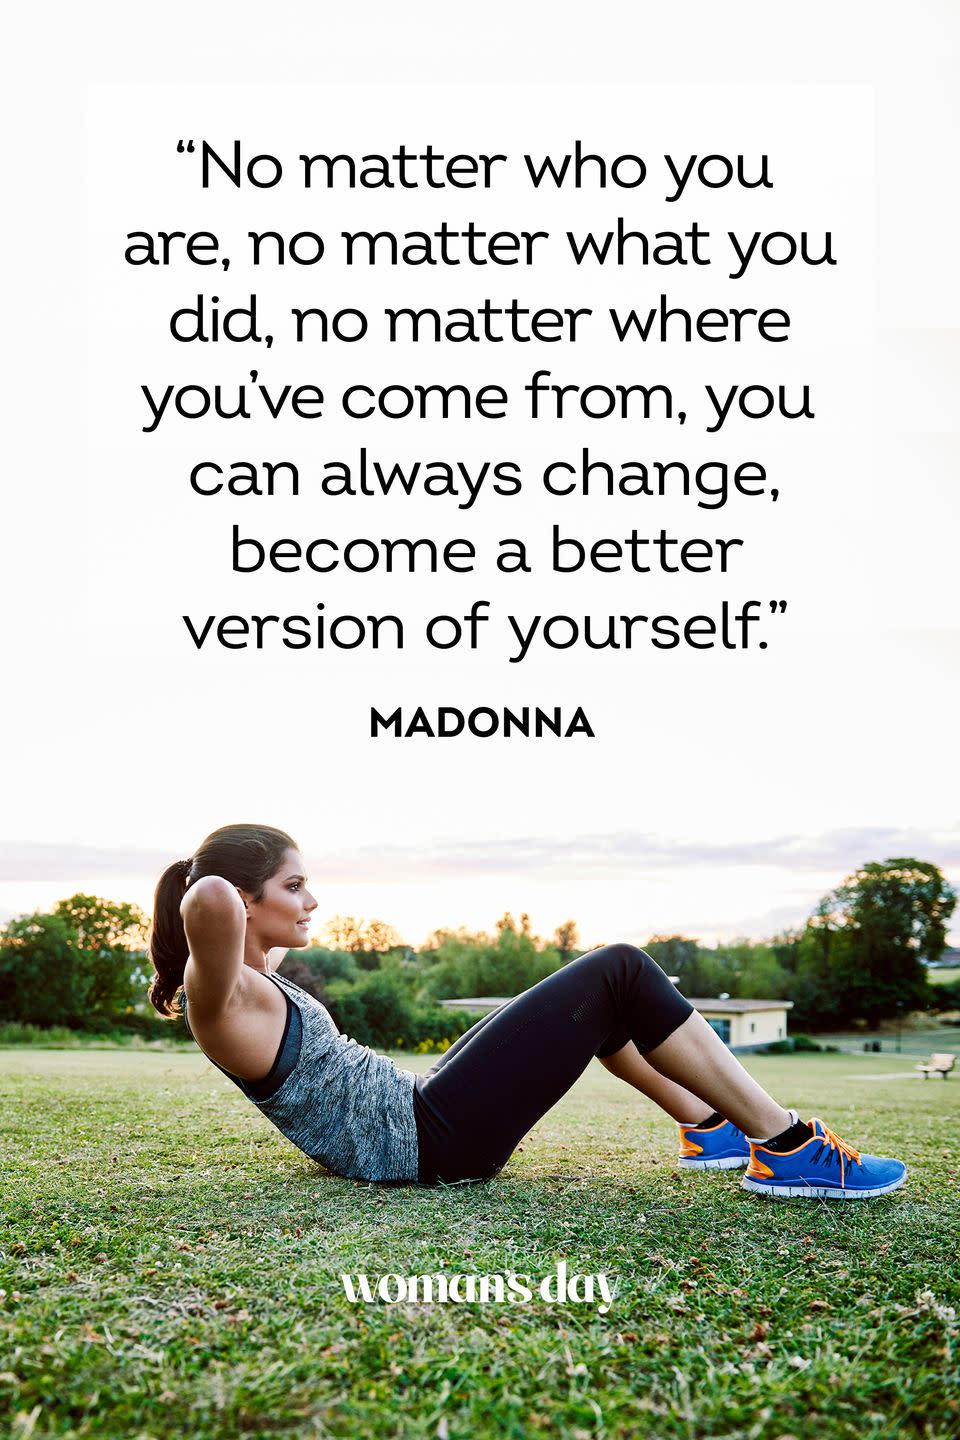 <p>“No matter who you are, no matter what you did, no matter where you’ve come from, you can always change, become a better version of yourself.”</p>